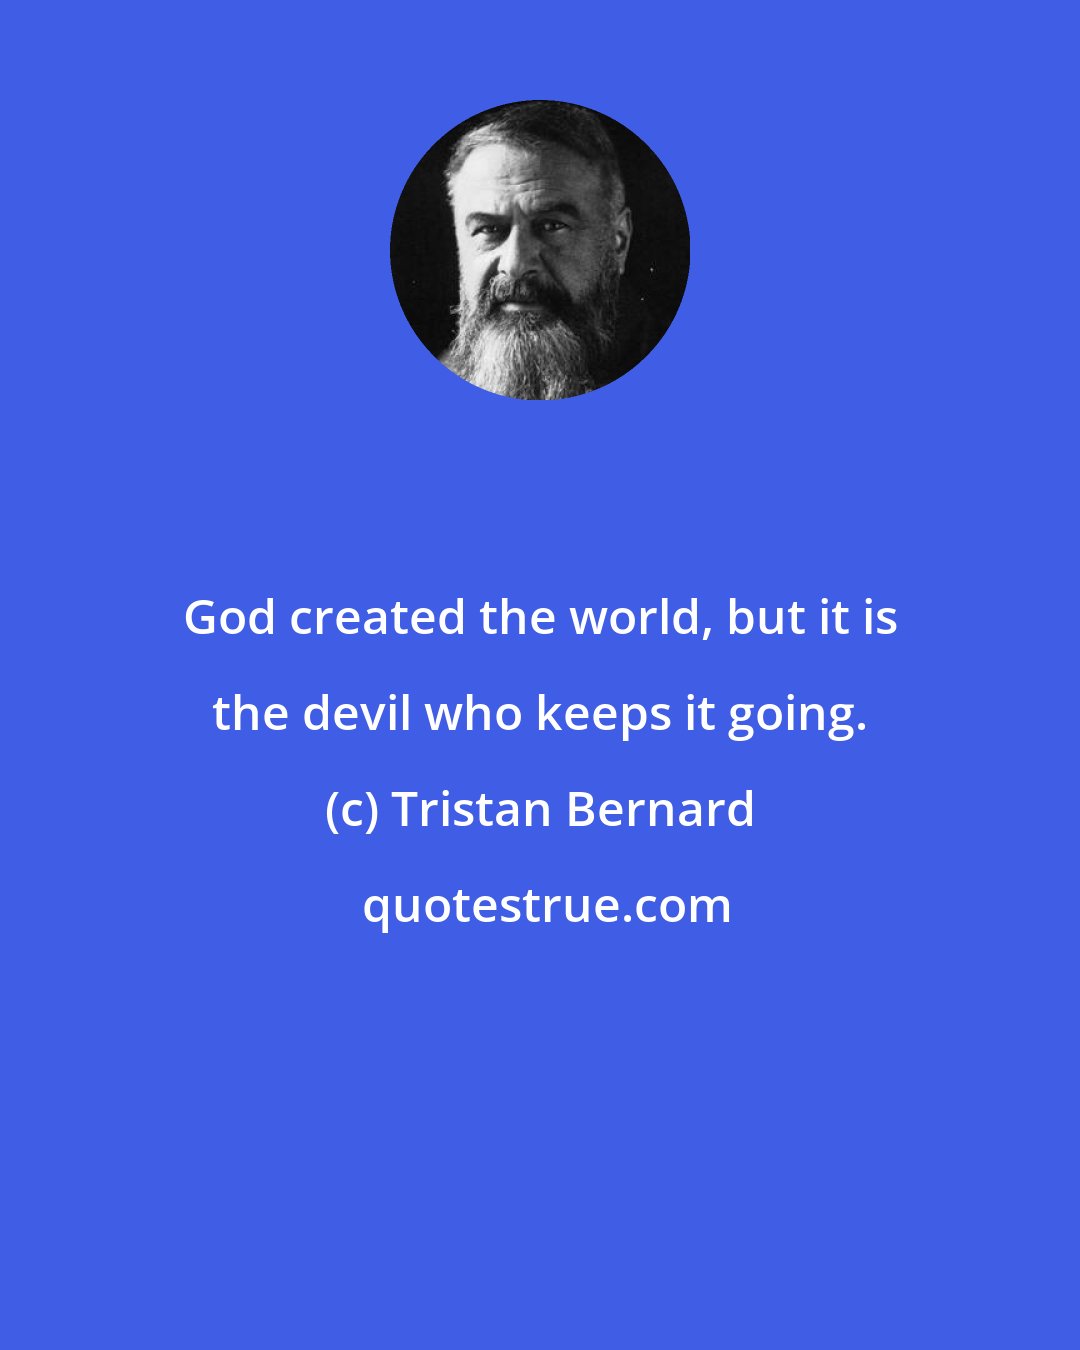 Tristan Bernard: God created the world, but it is the devil who keeps it going.